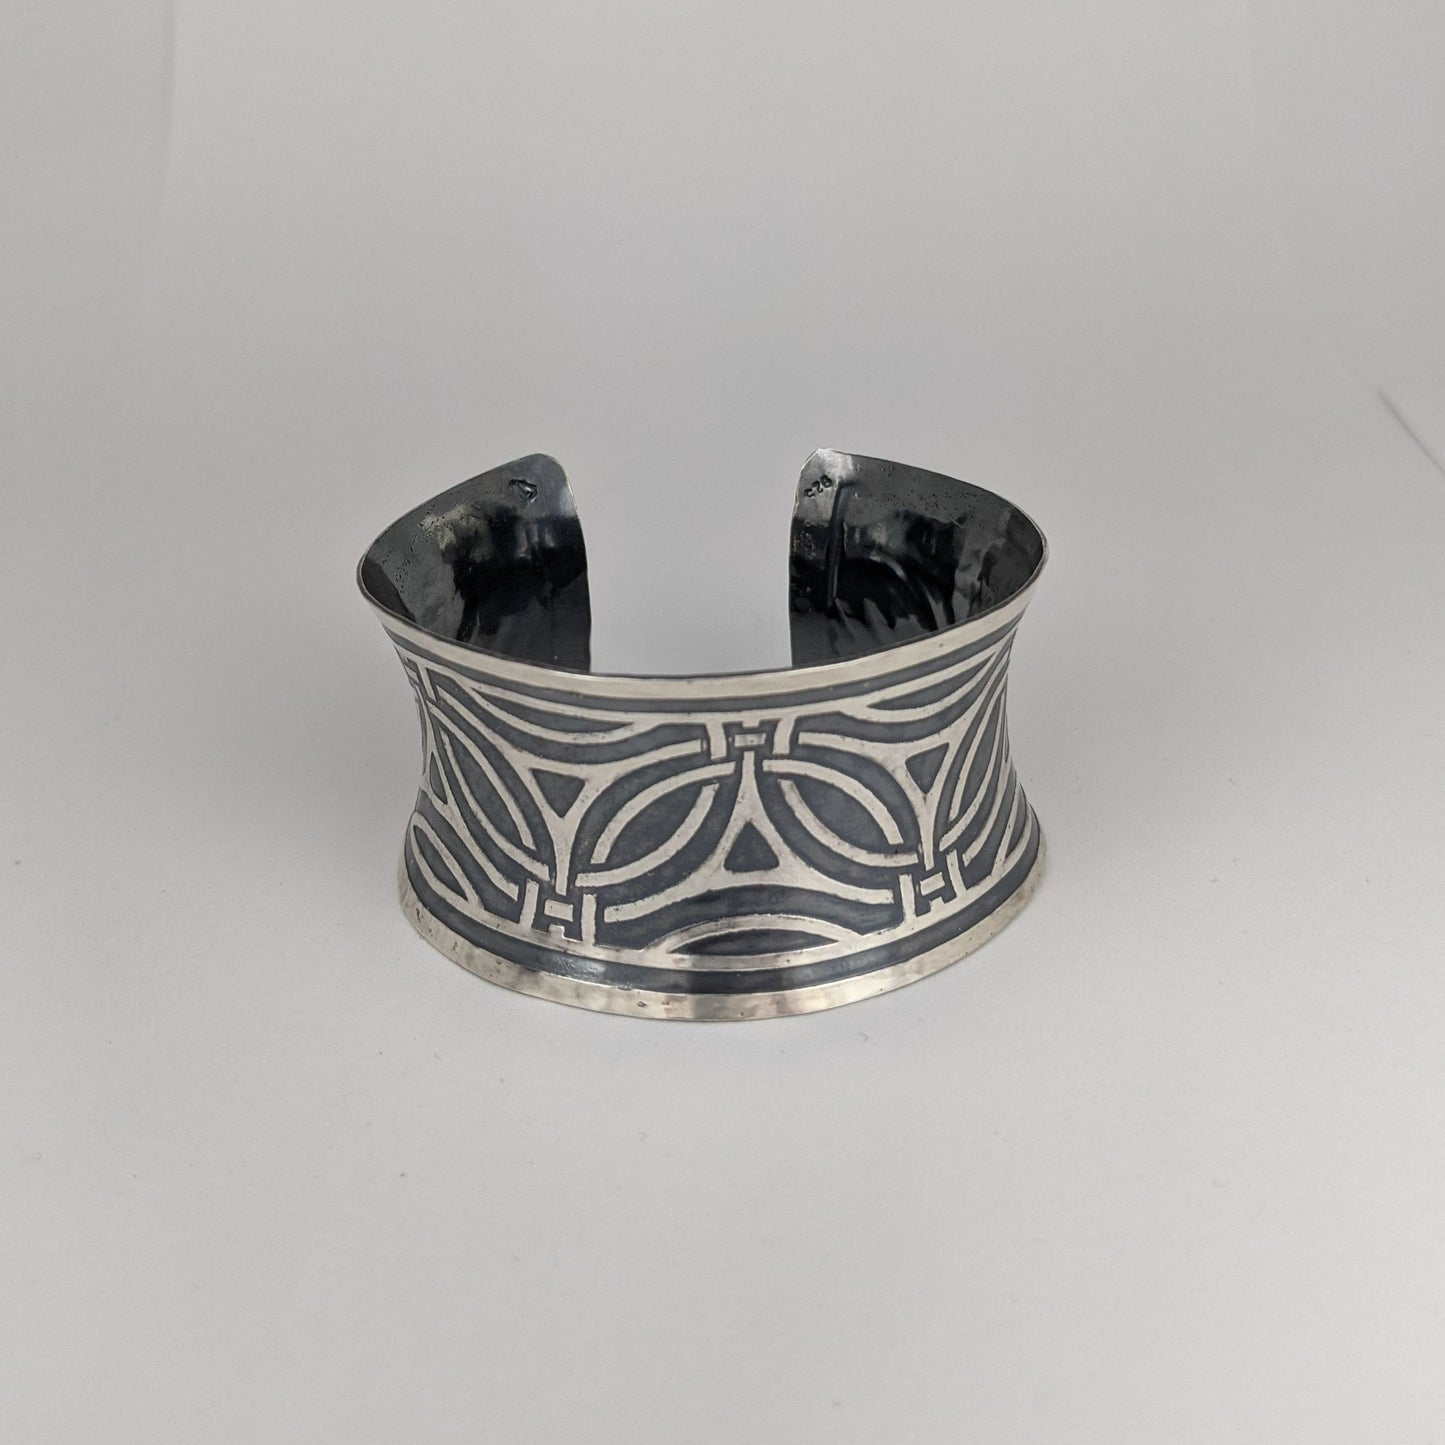 C155.31bs Wide Sterling Silver Cuffs, 92.5 SS, hand-formed, Art Deco etching & Black Pearl patina